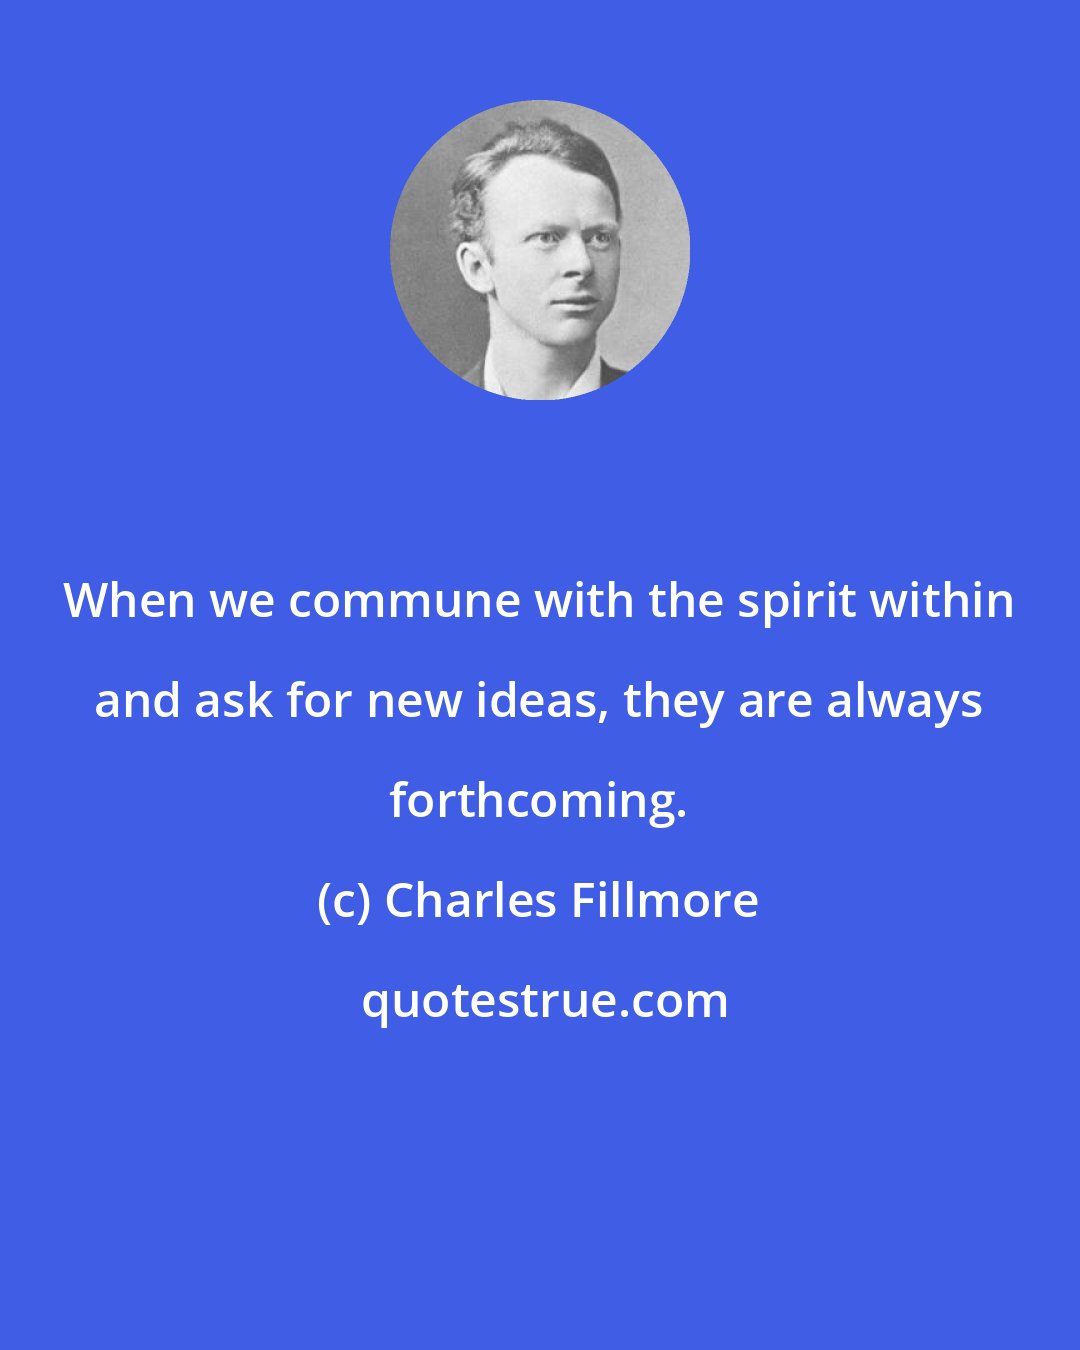 Charles Fillmore: When we commune with the spirit within and ask for new ideas, they are always forthcoming.